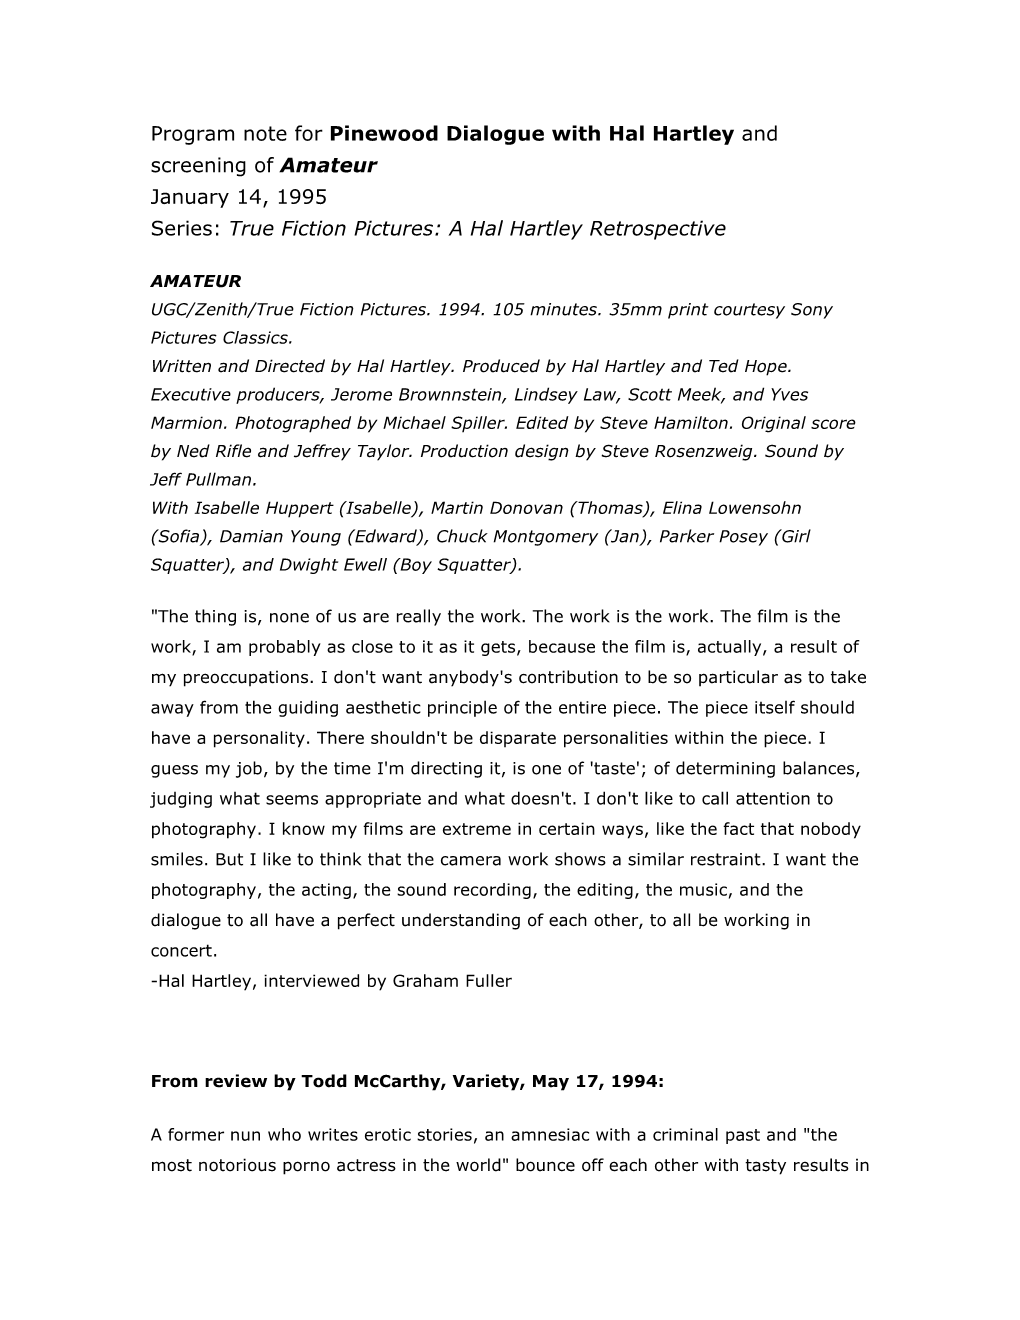 Program Note for Pinewood Dialogue with Hal Hartley and Screening of Amateur January 14, 1995 Series: True Fiction Pictures: a Hal Hartley Retrospective